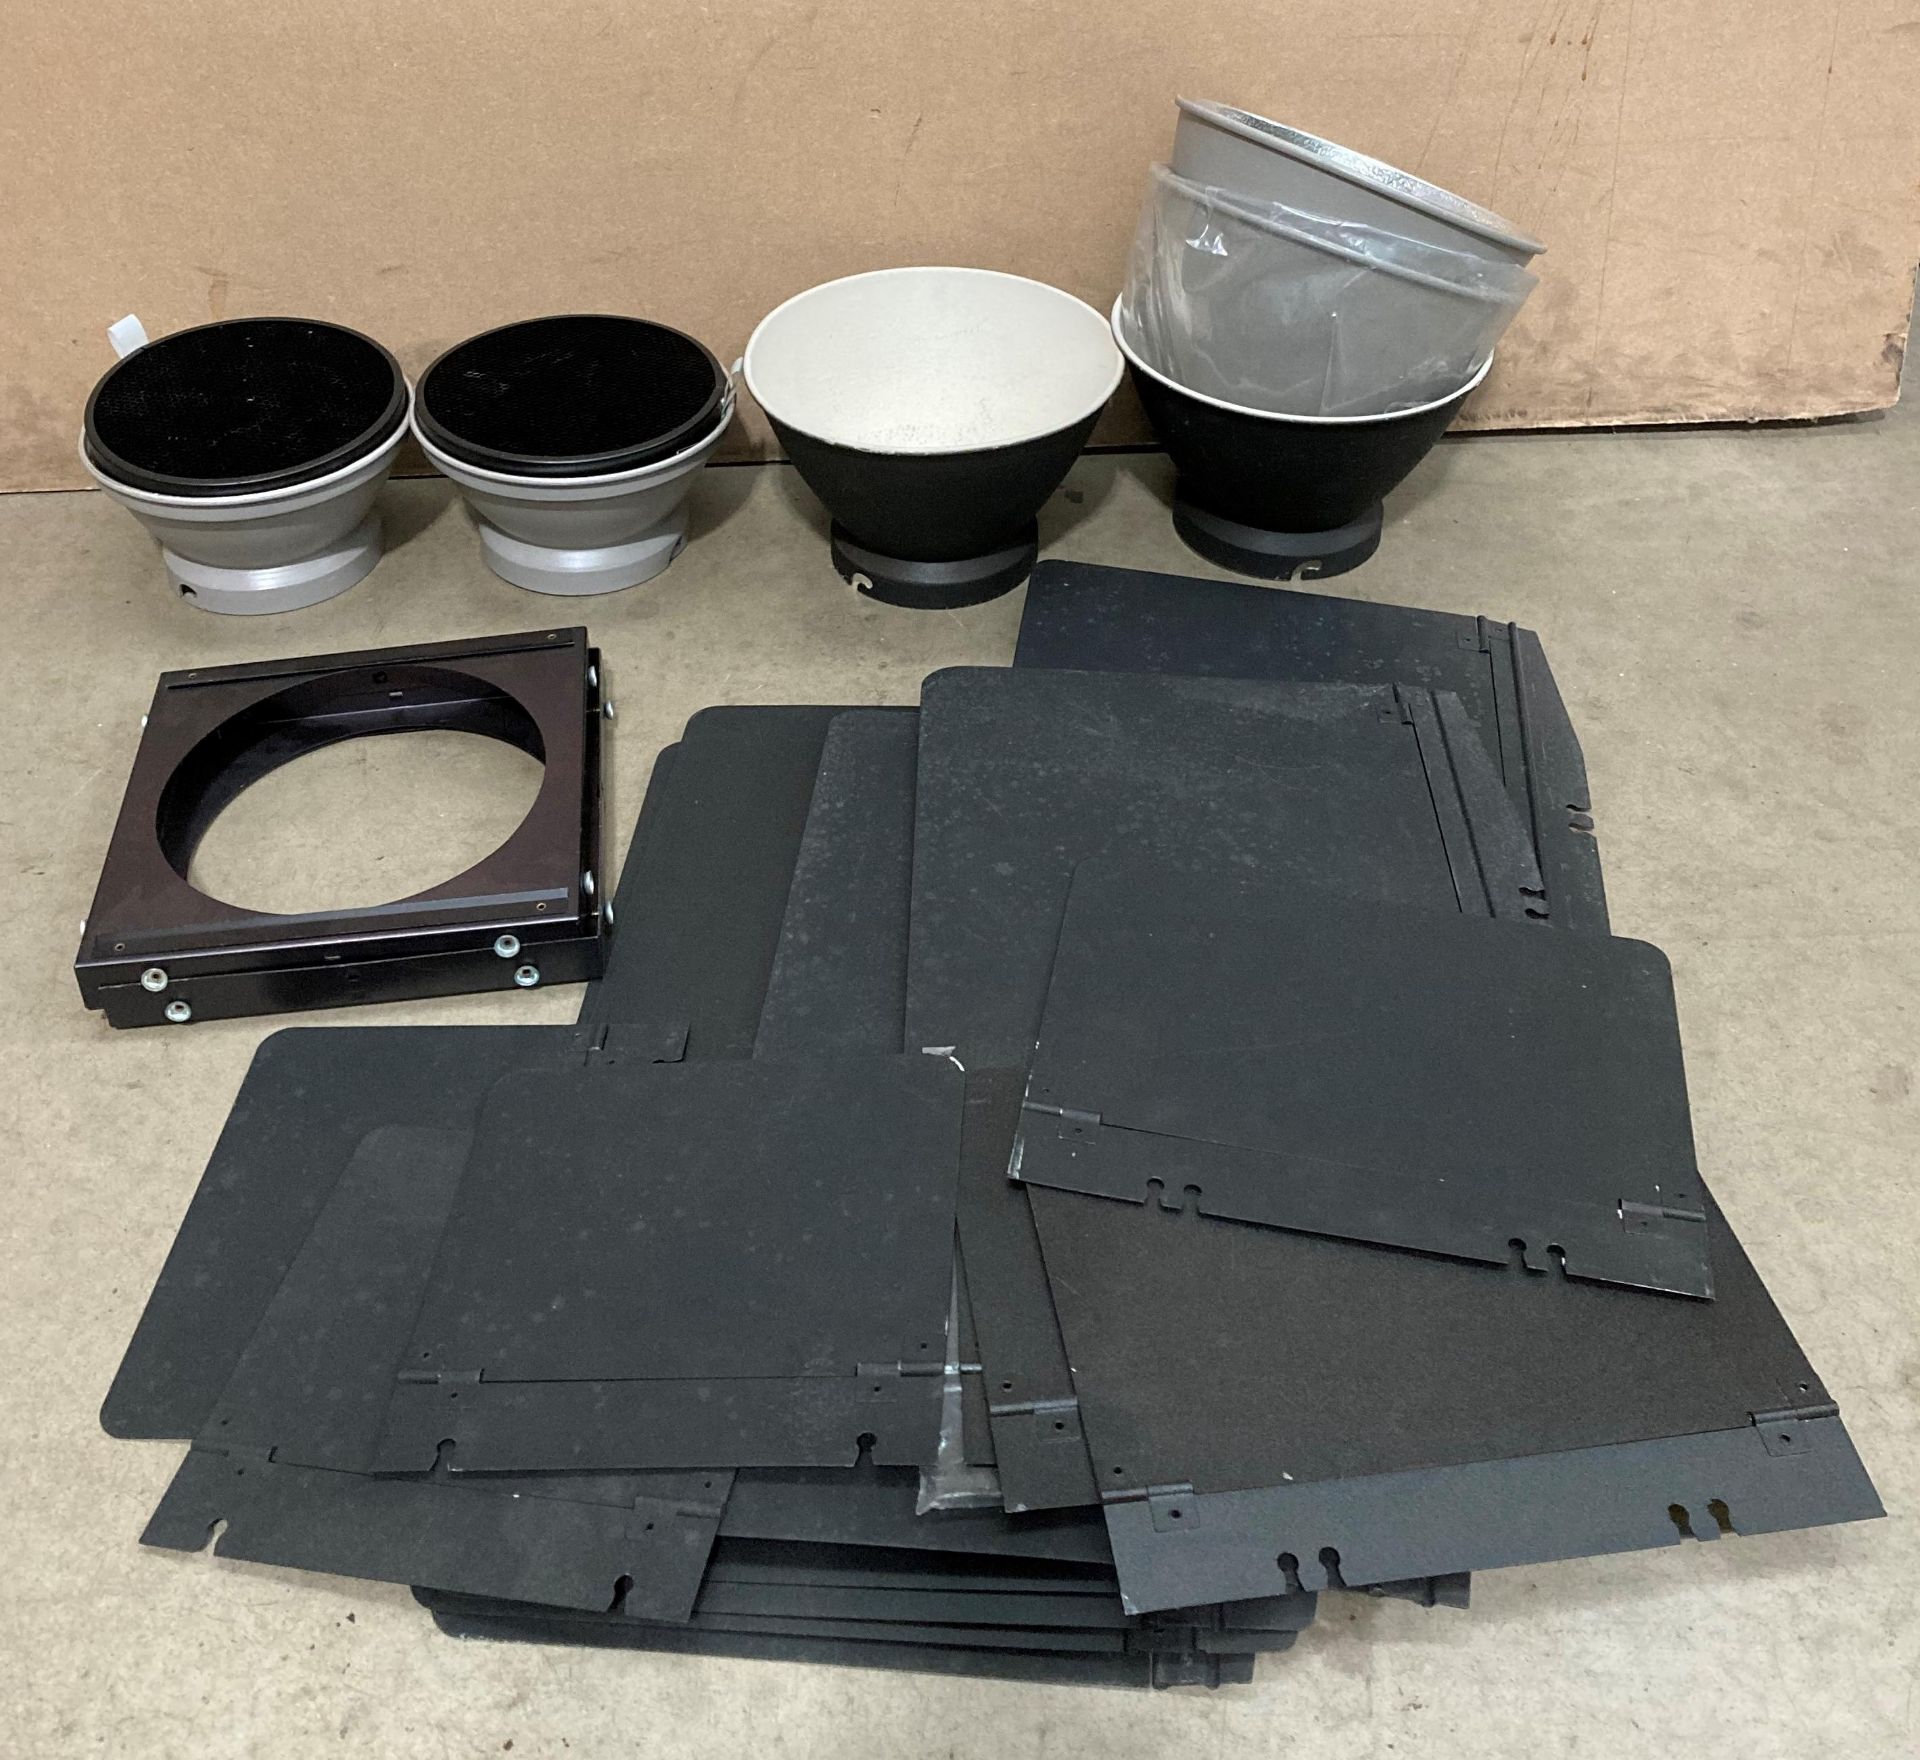 Contents to box - diffusers and reflectors for photography (Saleroom location: S2 QB 11)